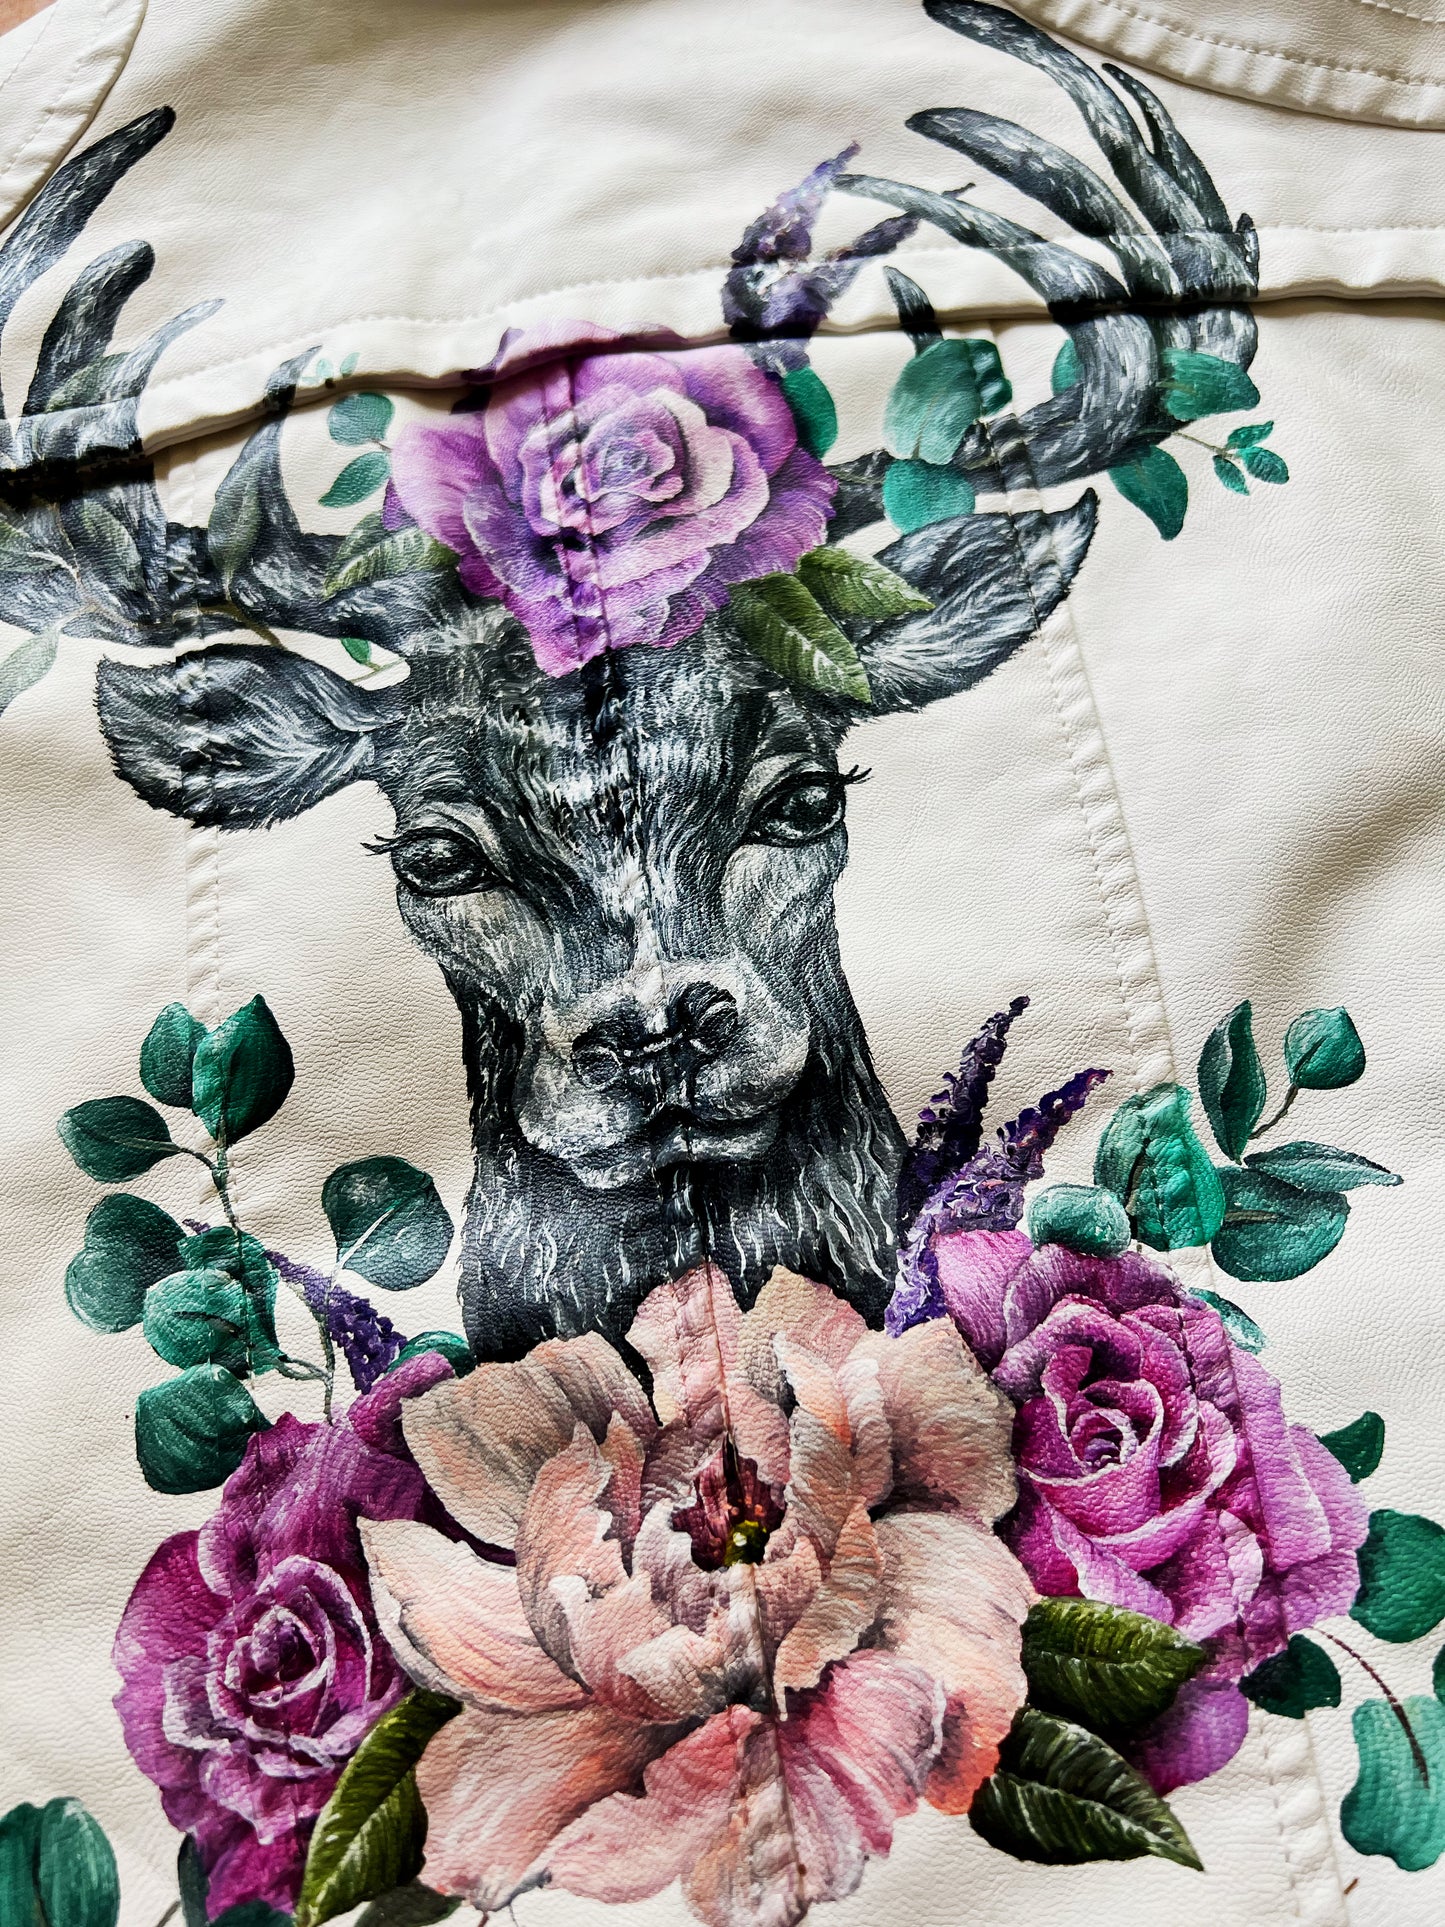 Leather/Faux Leather/Denim Jacket Painting, Stag and Flowers Design